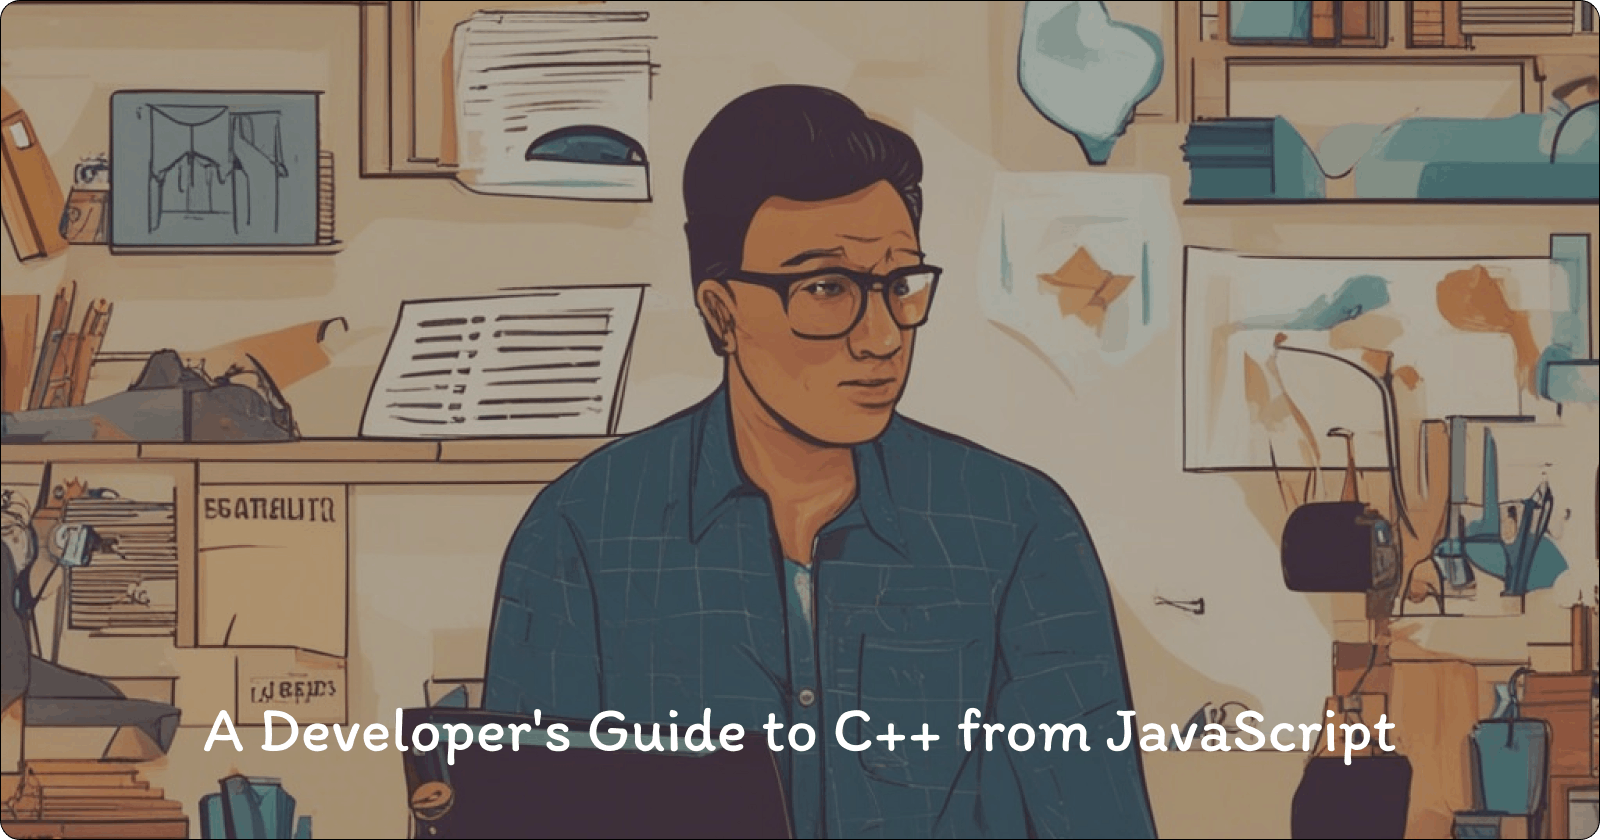 Switching Gears: A Developer's Guide to C++ from JavaScript